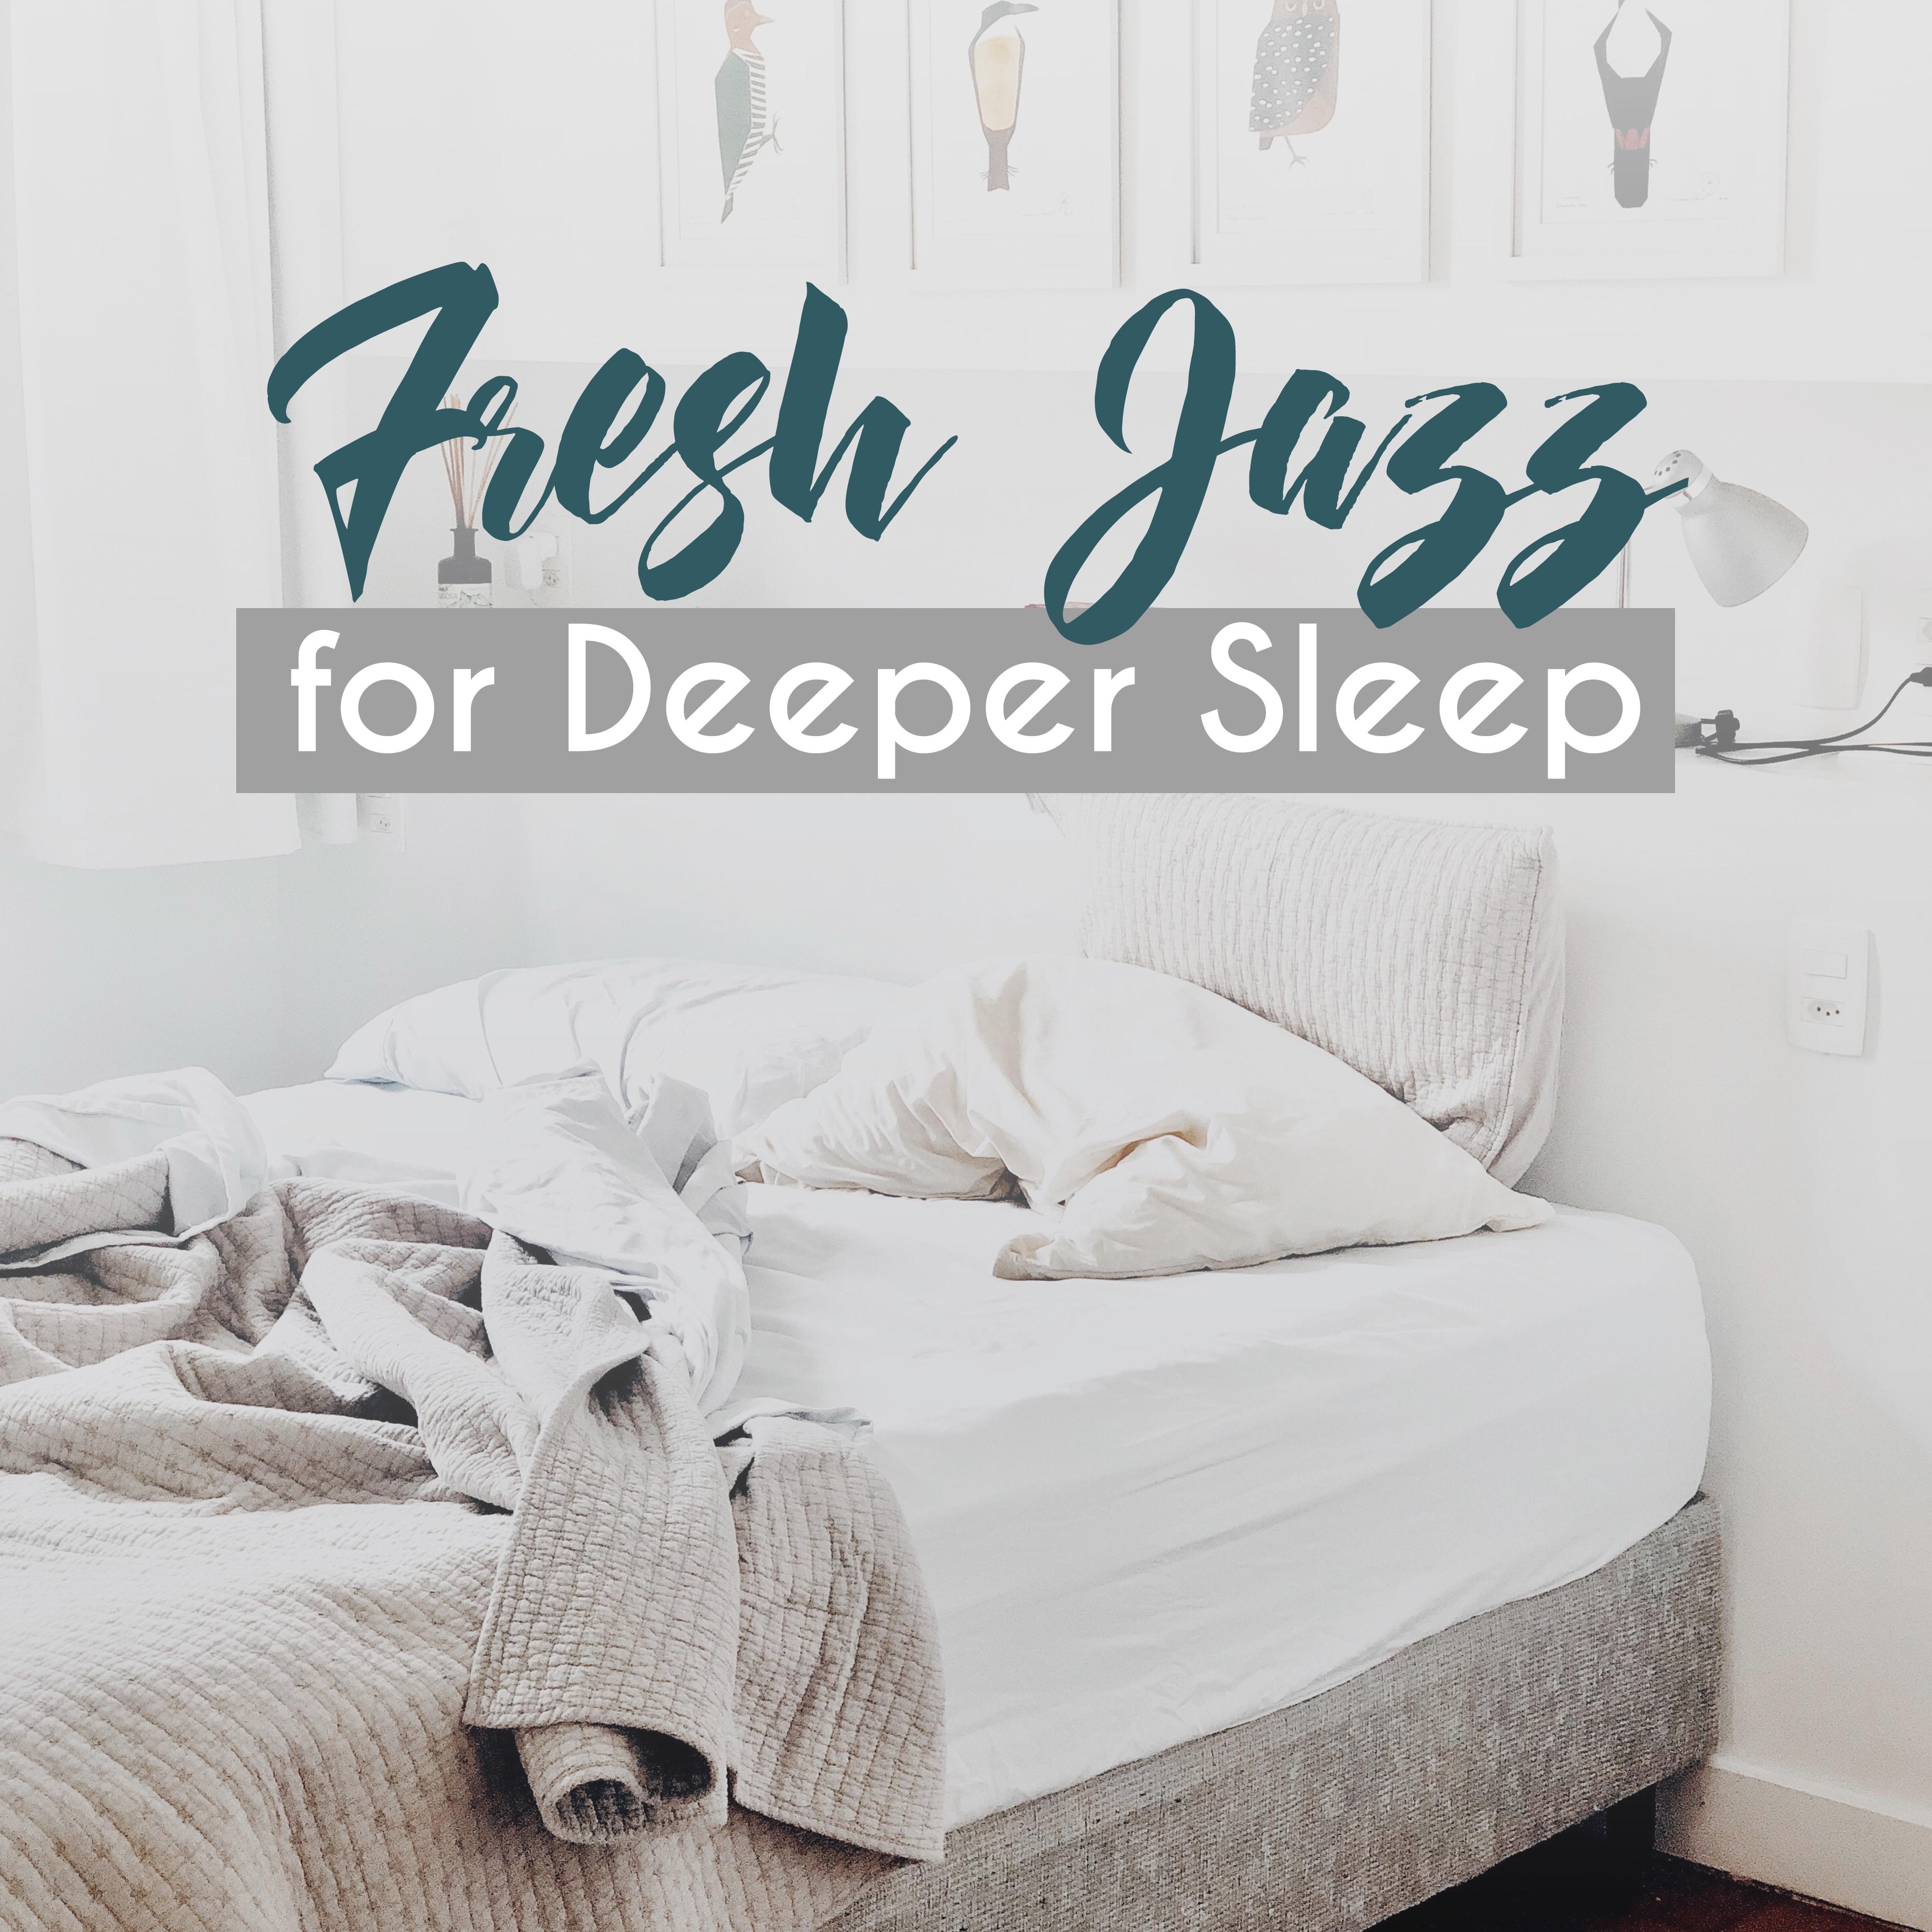 Fresh Jazz for Deeper Sleep  Ambient Music for Relaxation, Rest, Sleep, Jazz Vibrations to Calm Down, Instrumental Jazz Music Ambient